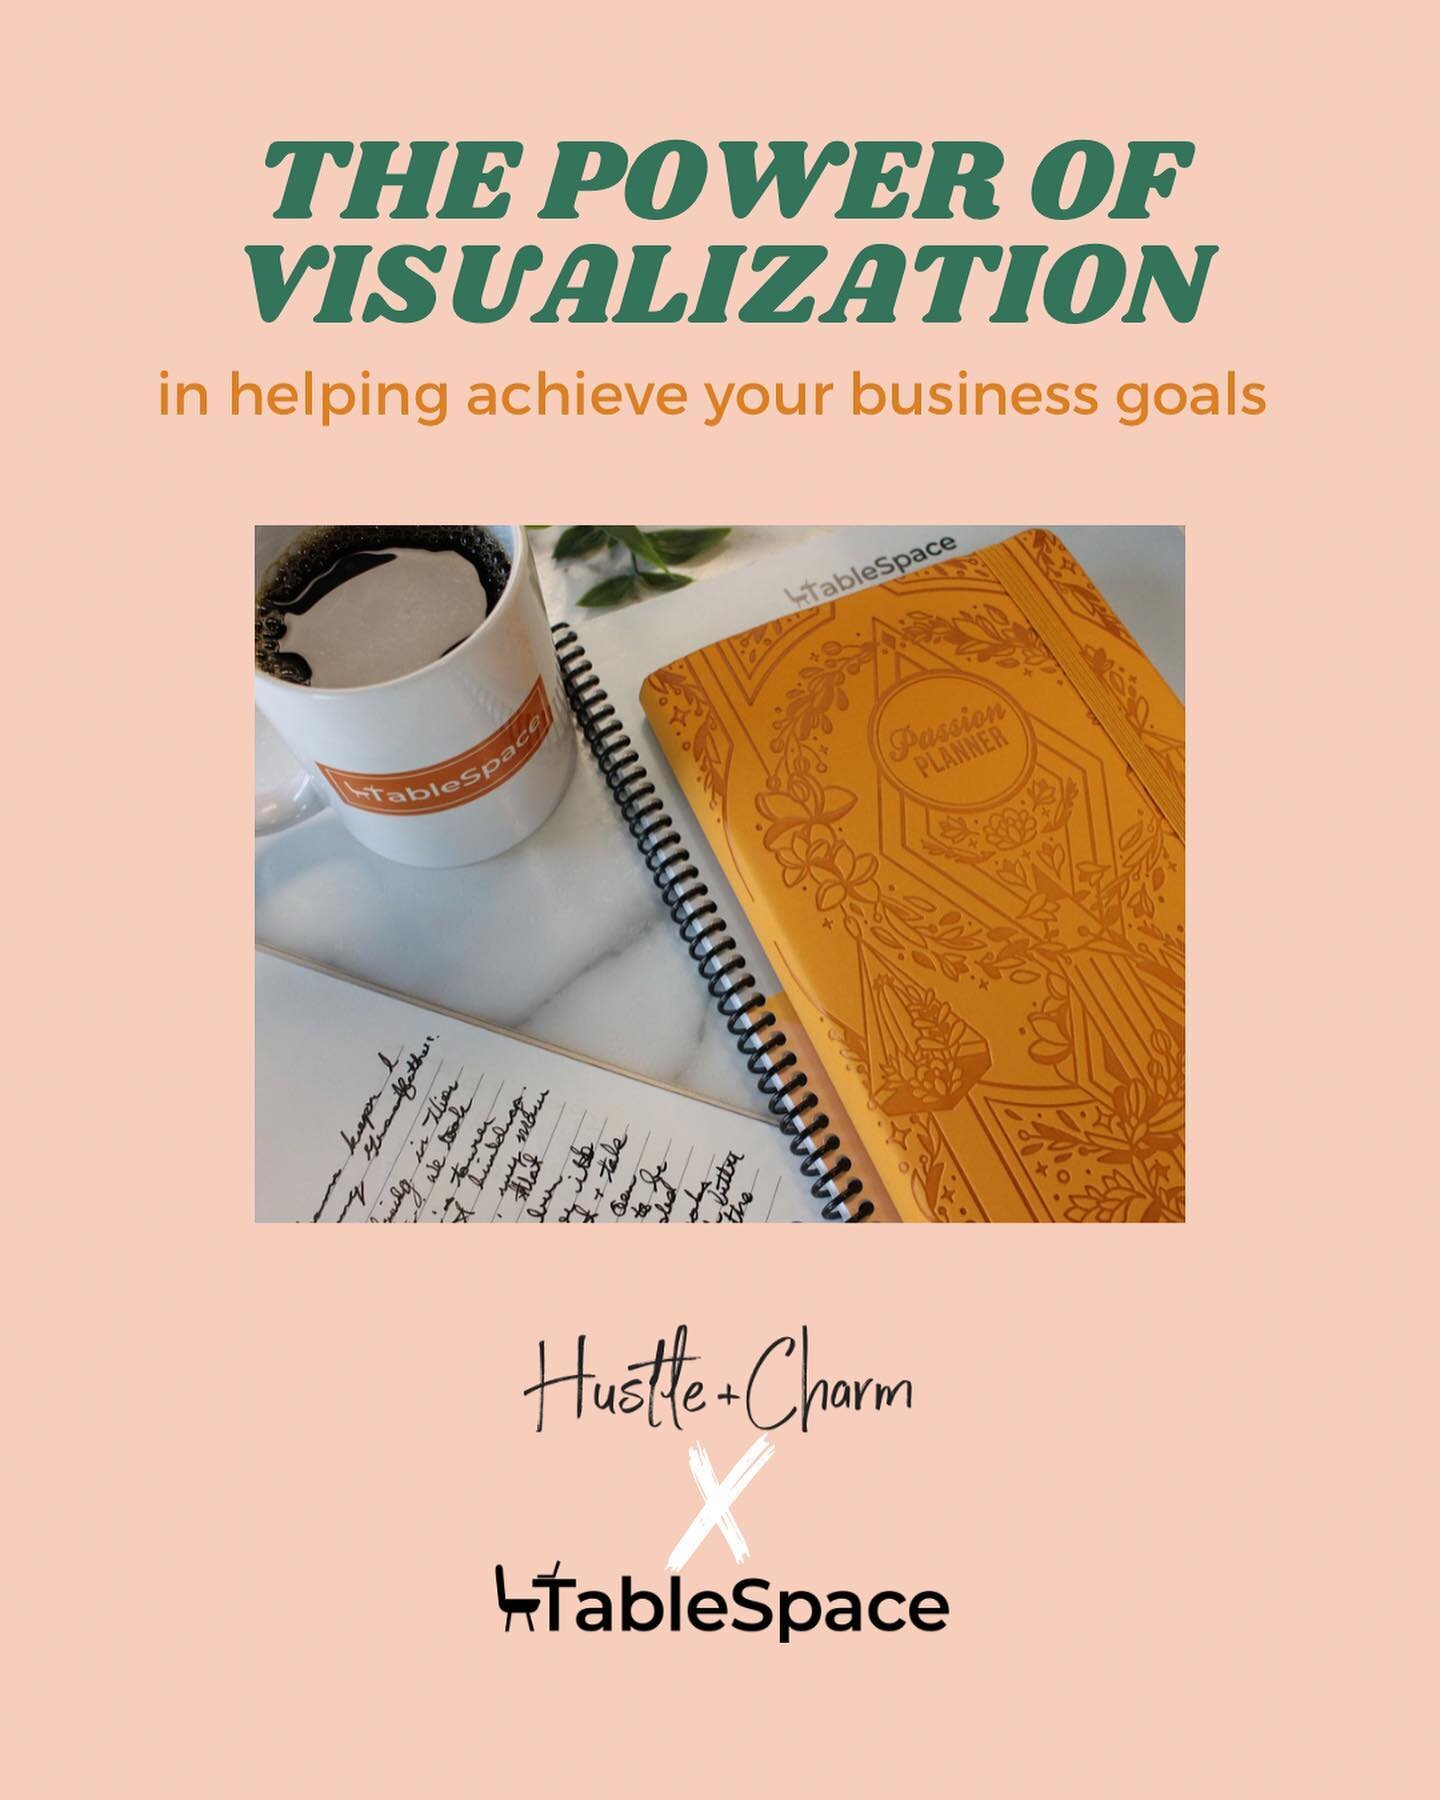 Are you a student, recent grad or entrepreneur struggling to achieve your business goals? Visualization could be the missing piece in your success puzzle. 

The act of visualization can be extremely powerful if used right. Click the link in our bio t